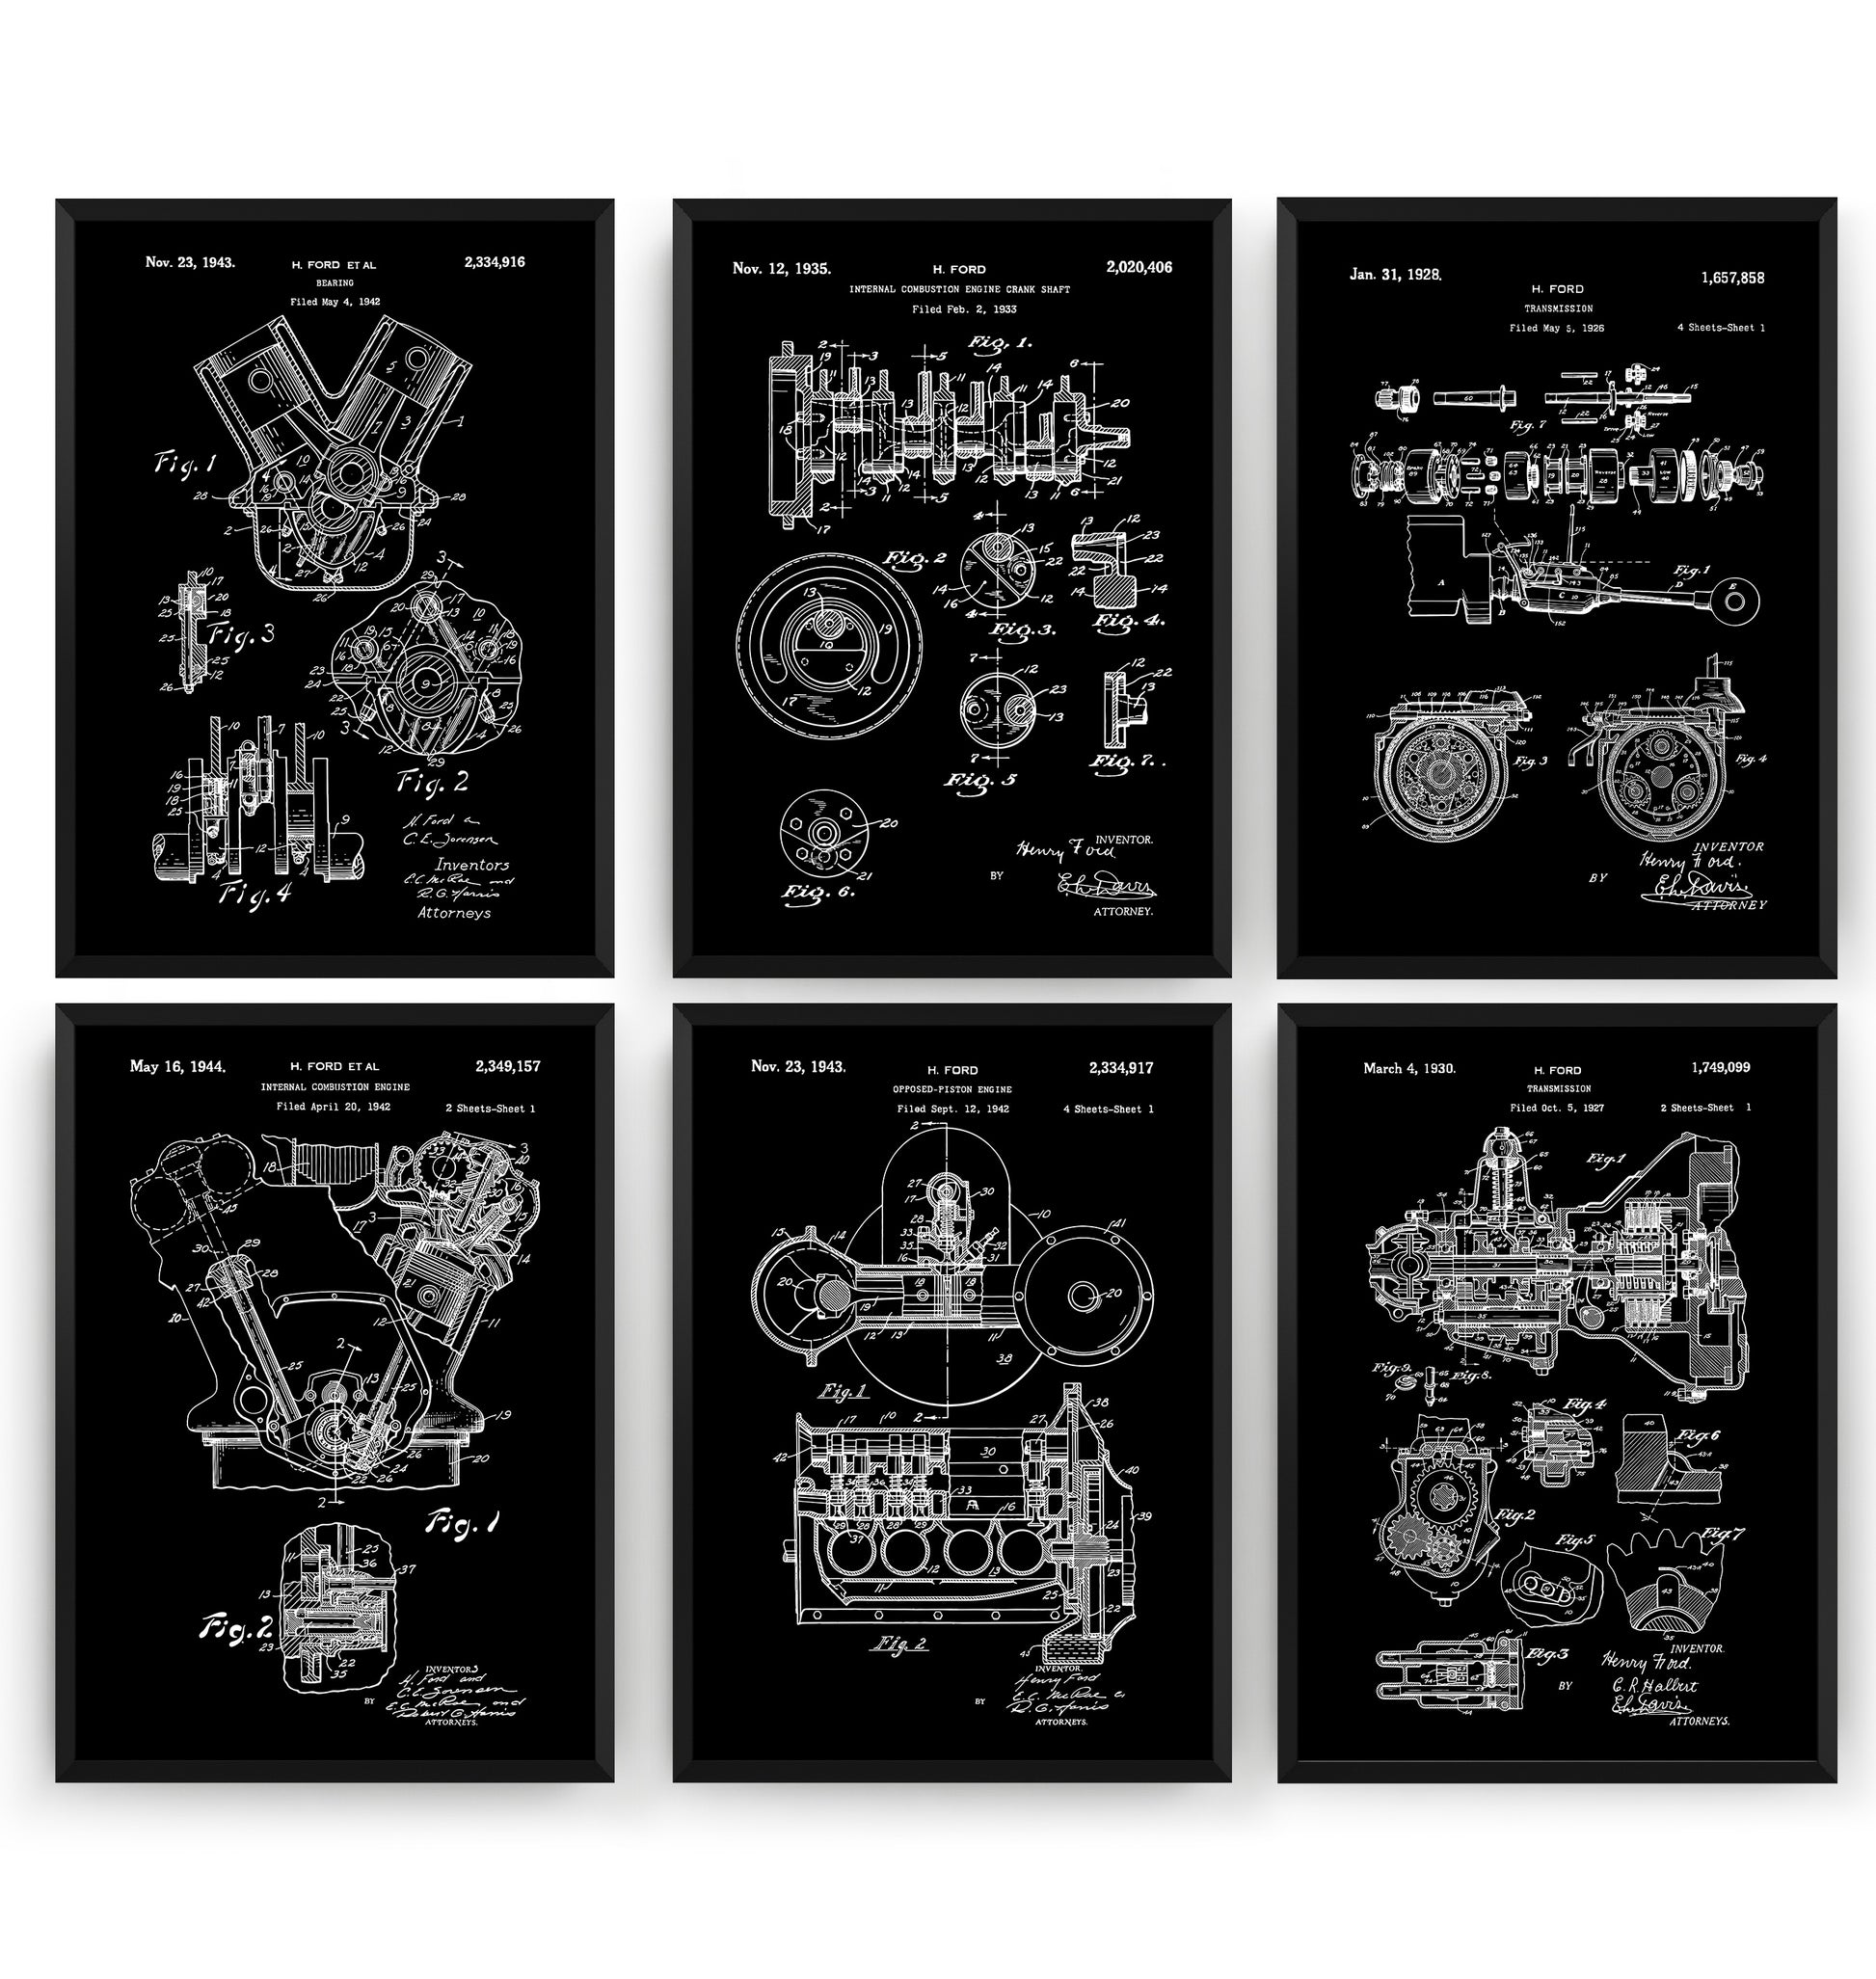 Henry Ford Set Of 6 Patent Prints - Magic Posters